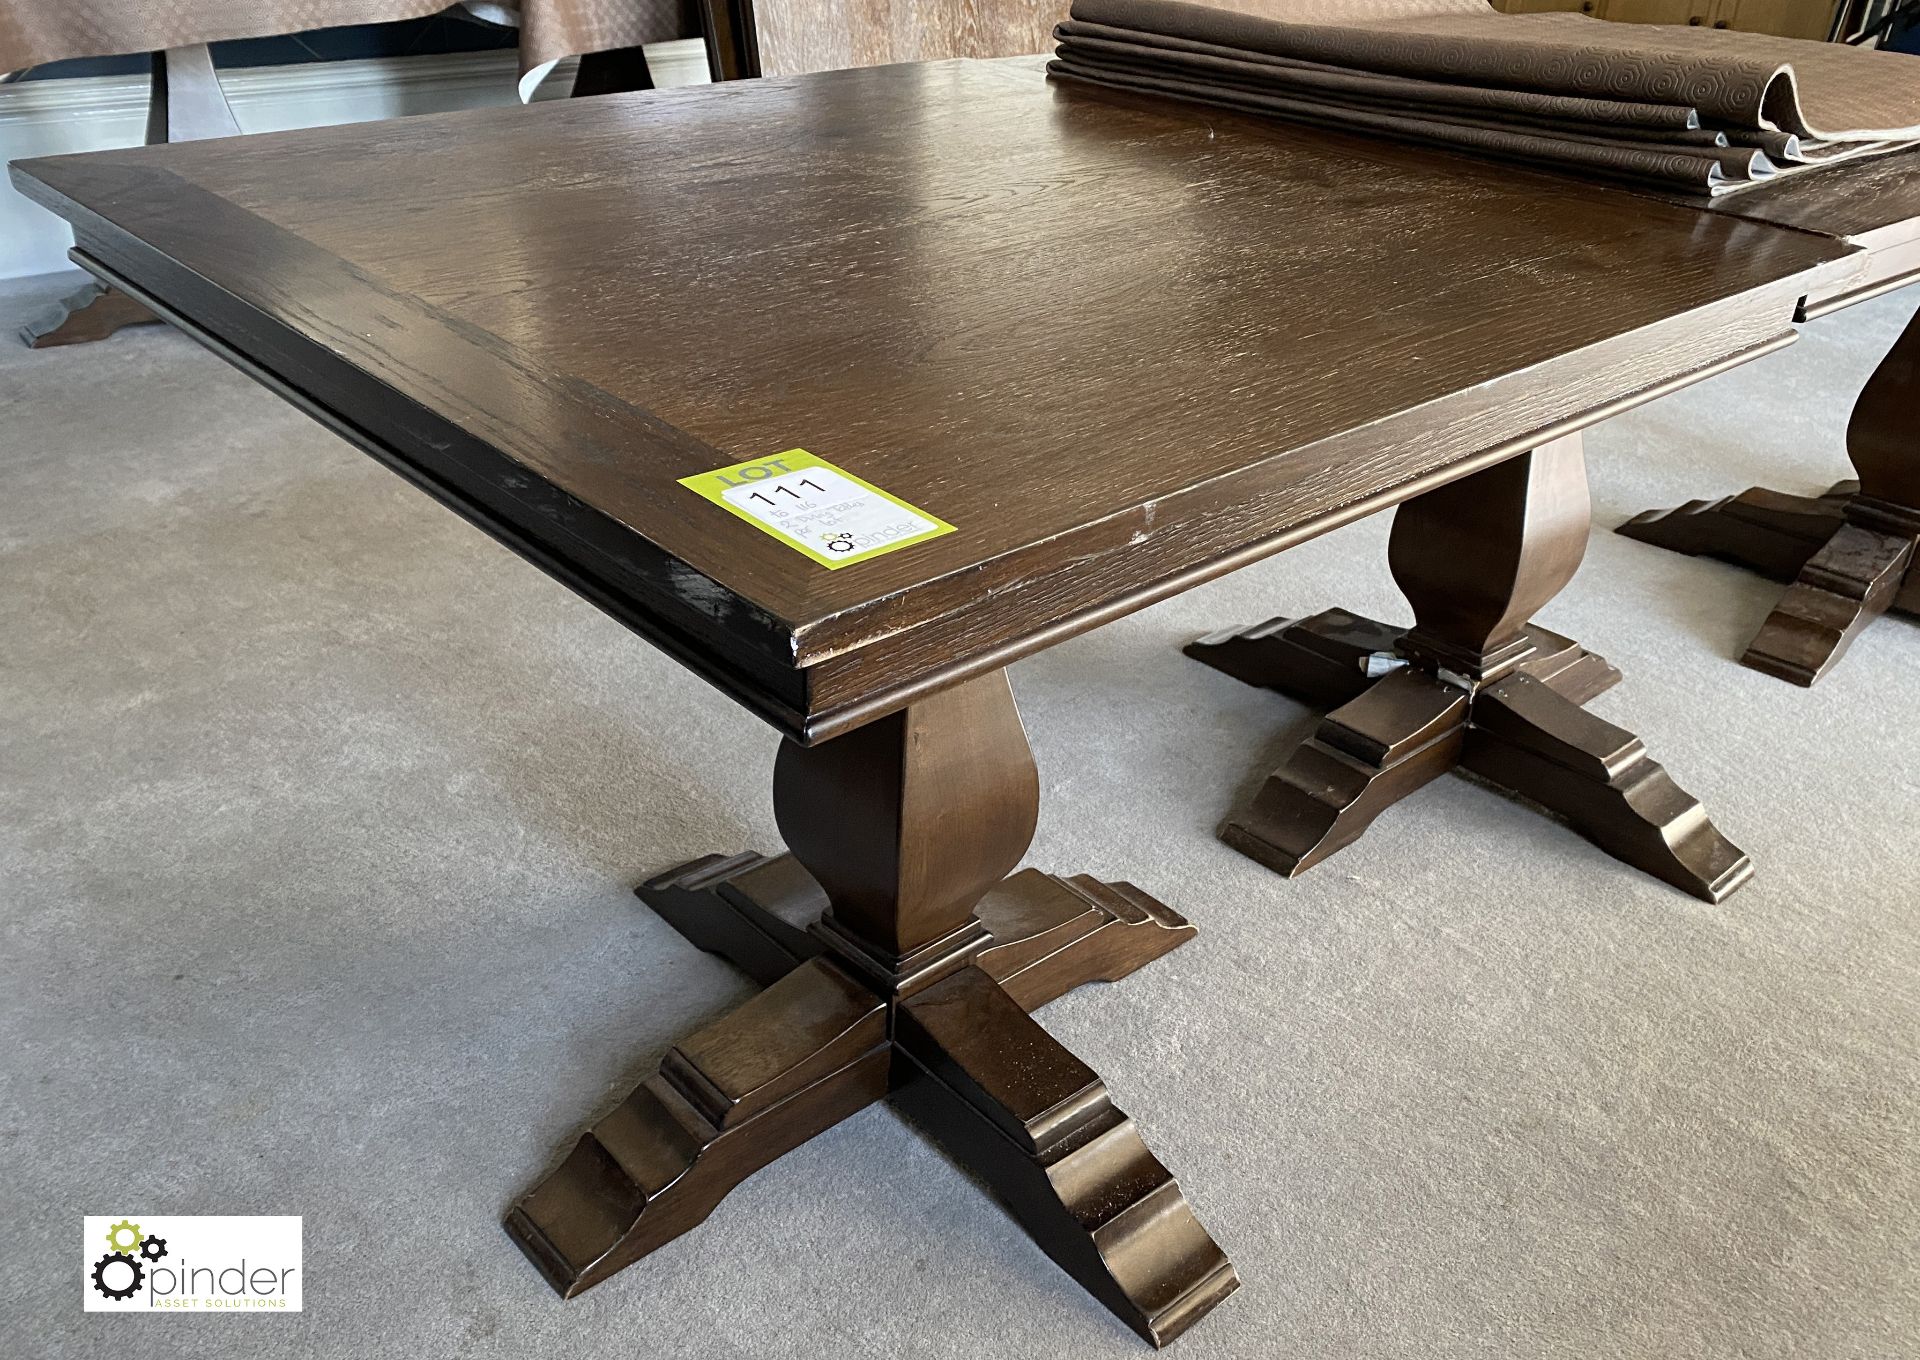 2 oak effect single support Dining Tables, 900mm x 900mm x 760mm - Image 2 of 4